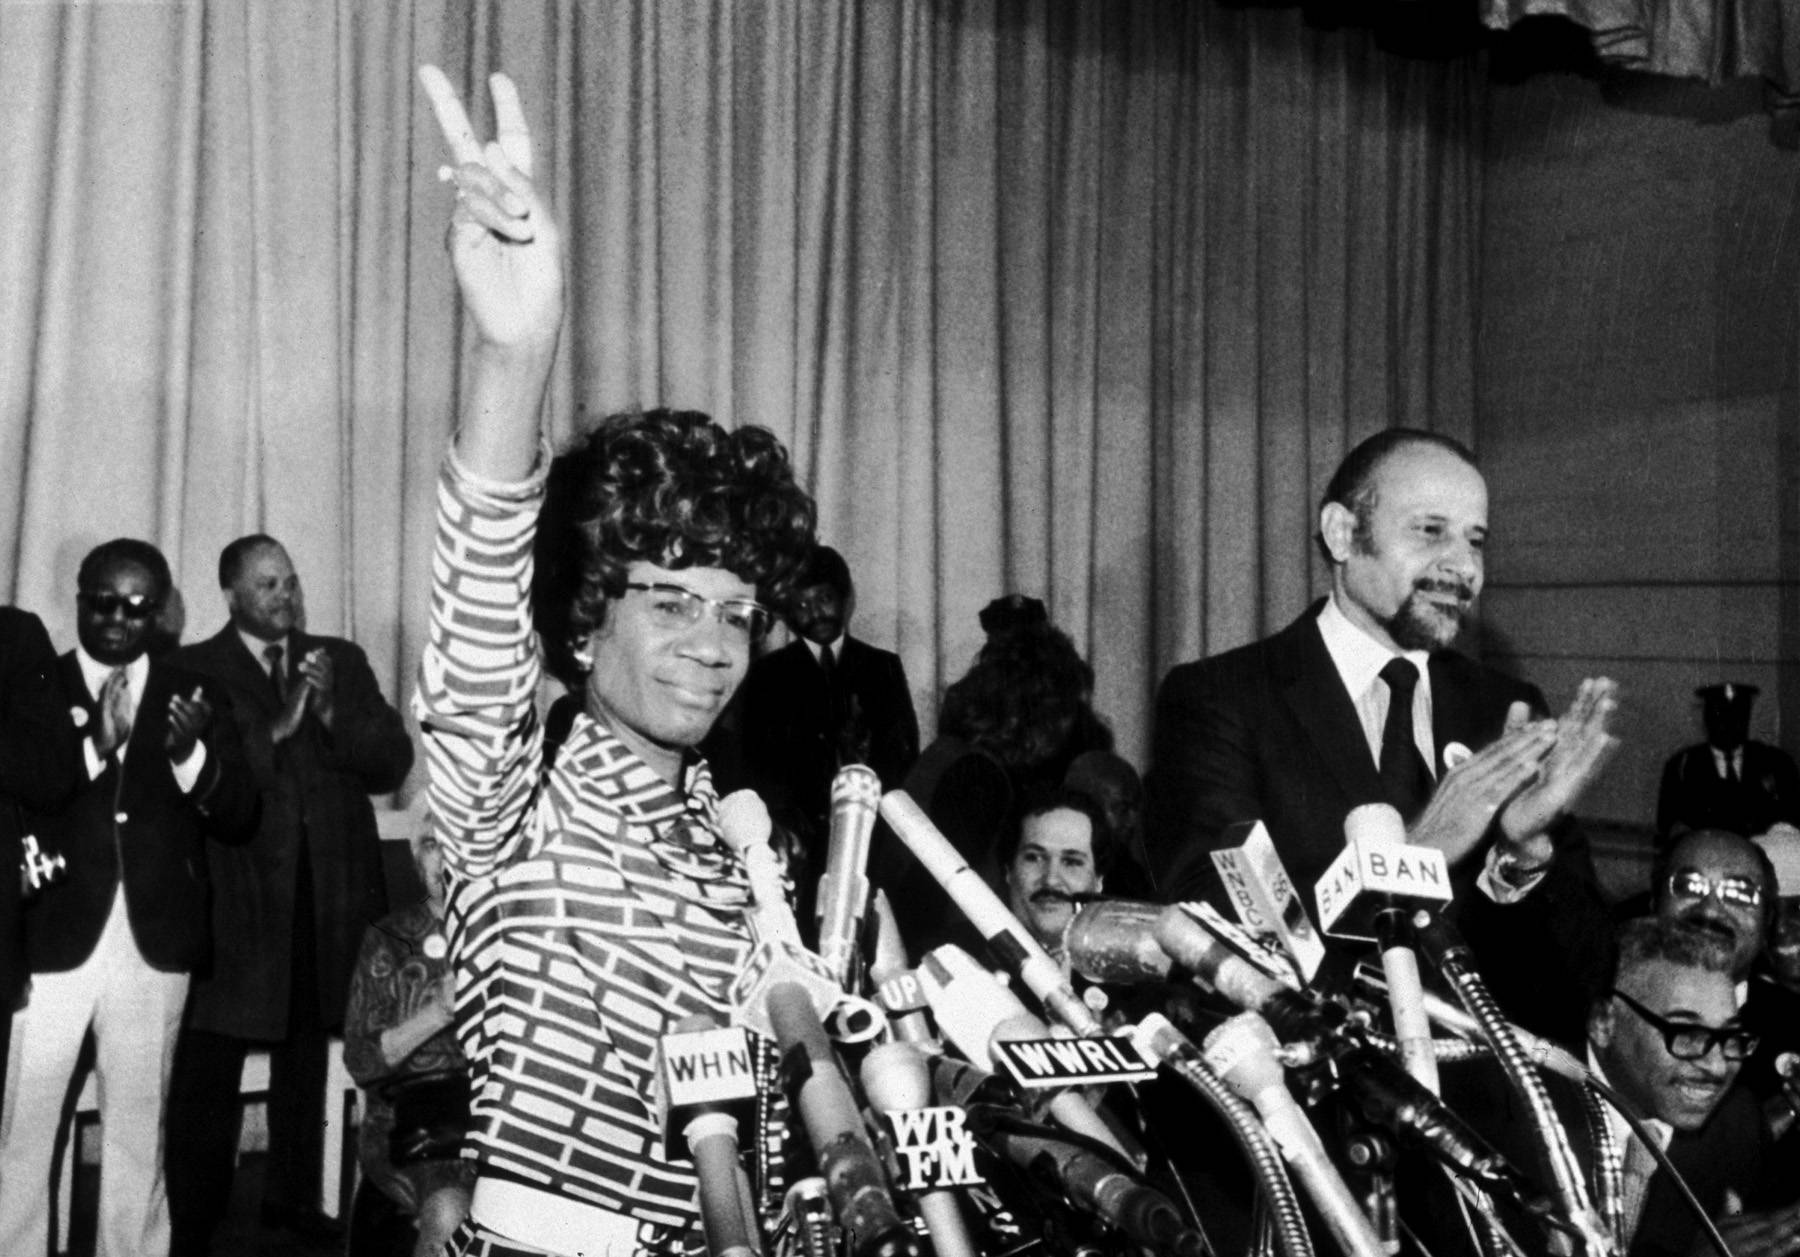 Shirley Chisholm becomes the first Black woman elected to Congress